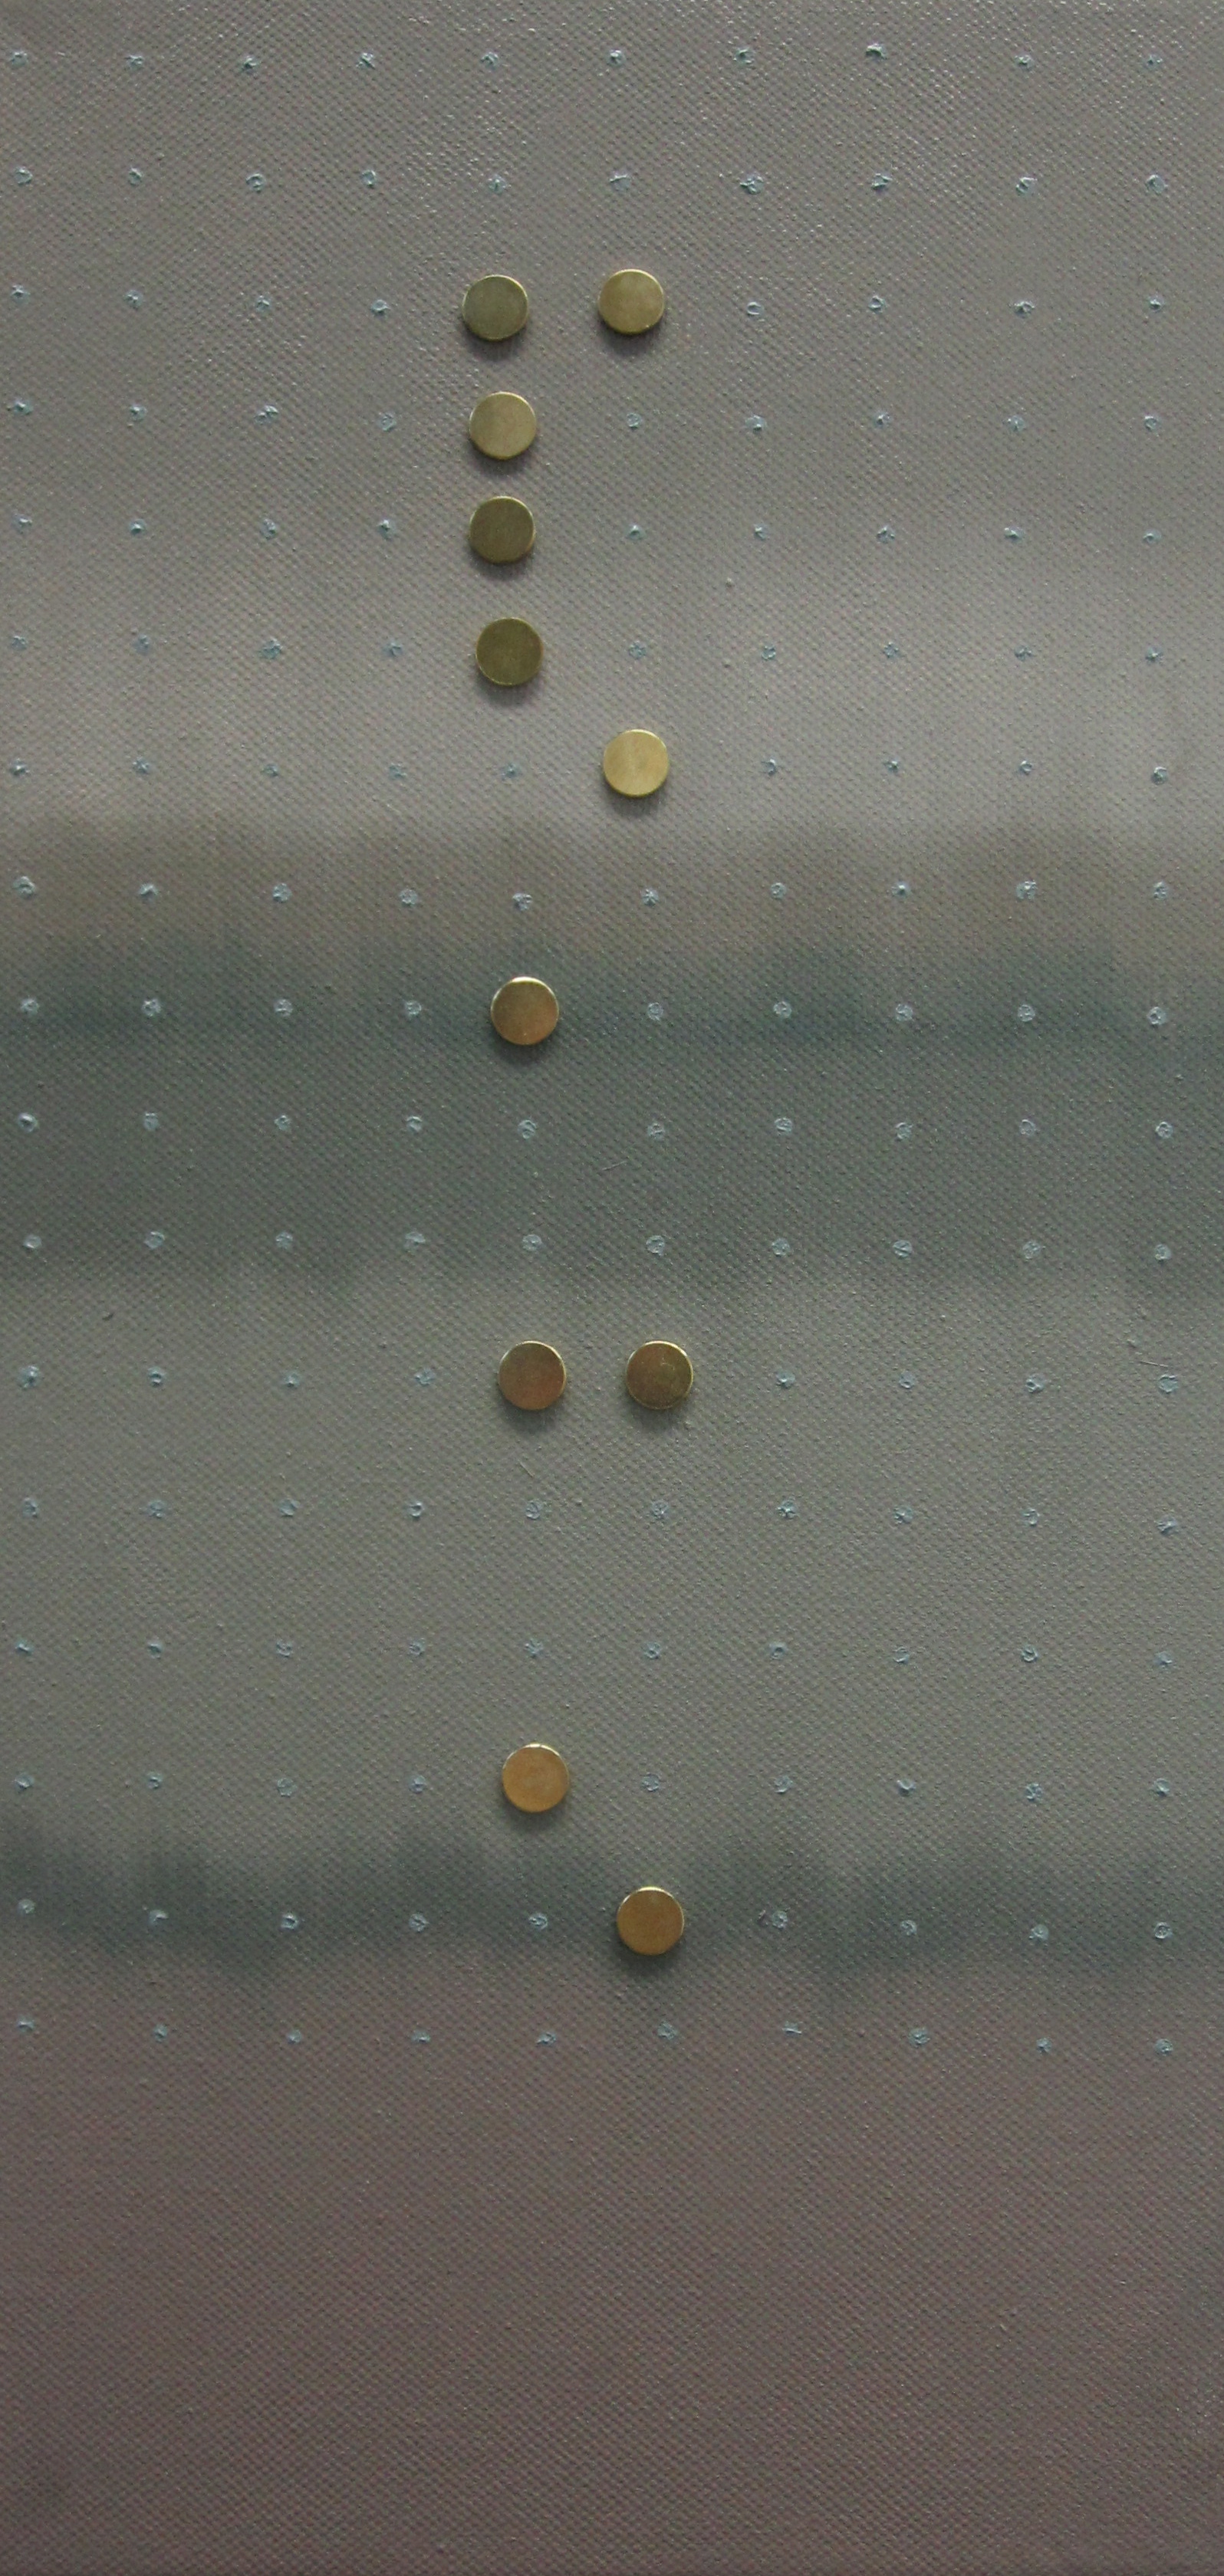 Message for the blinds
2011
Oil on canvas and pins
40cm x 20cm